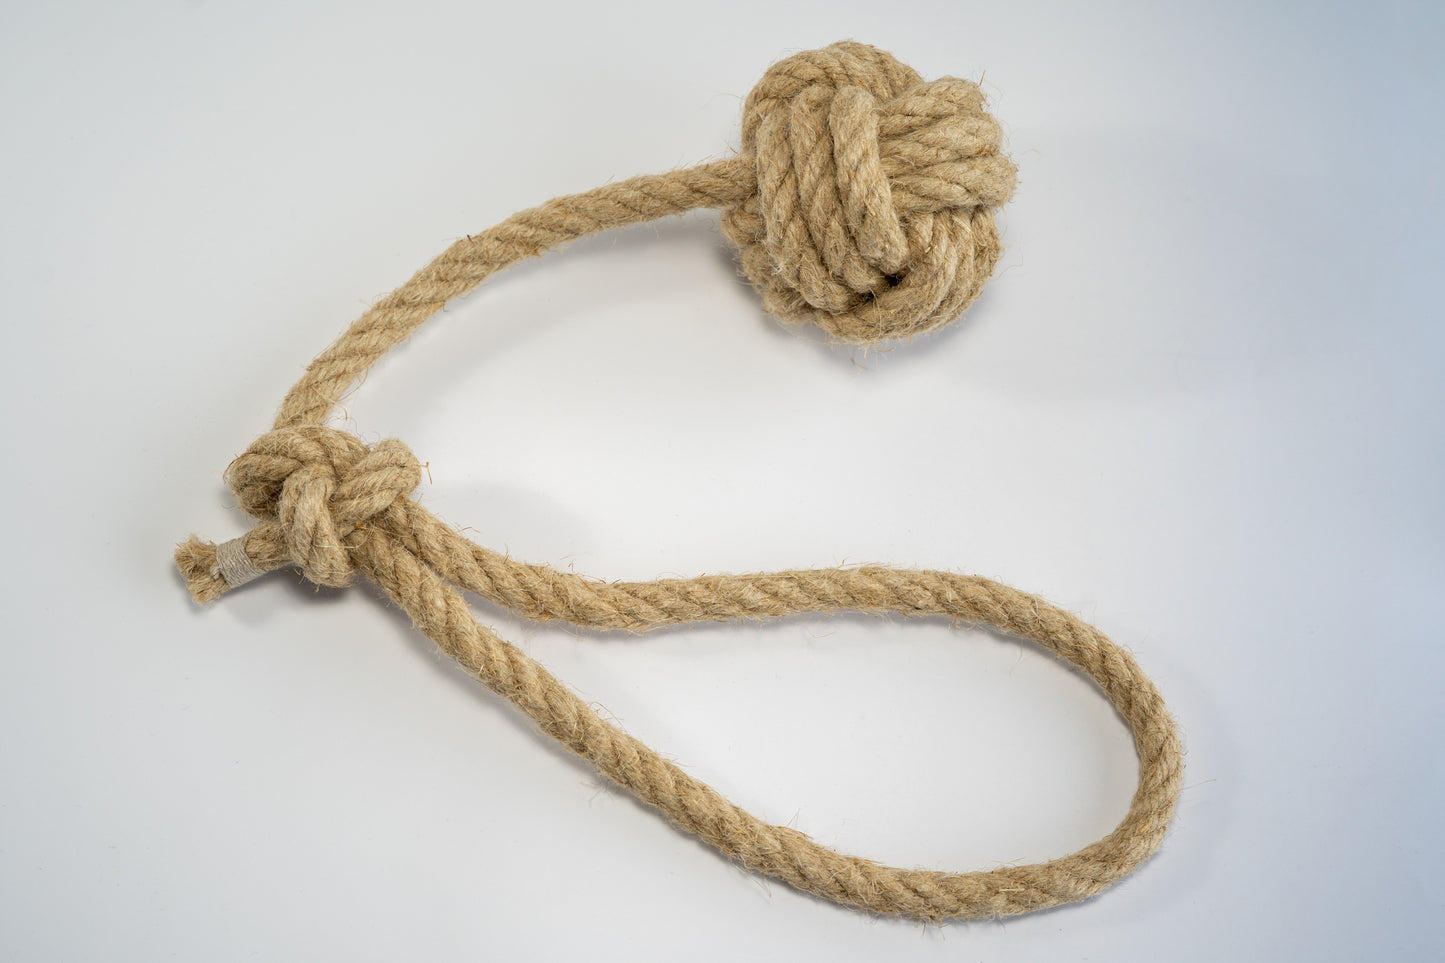 Hemp rope with large monkey fist for dogs.